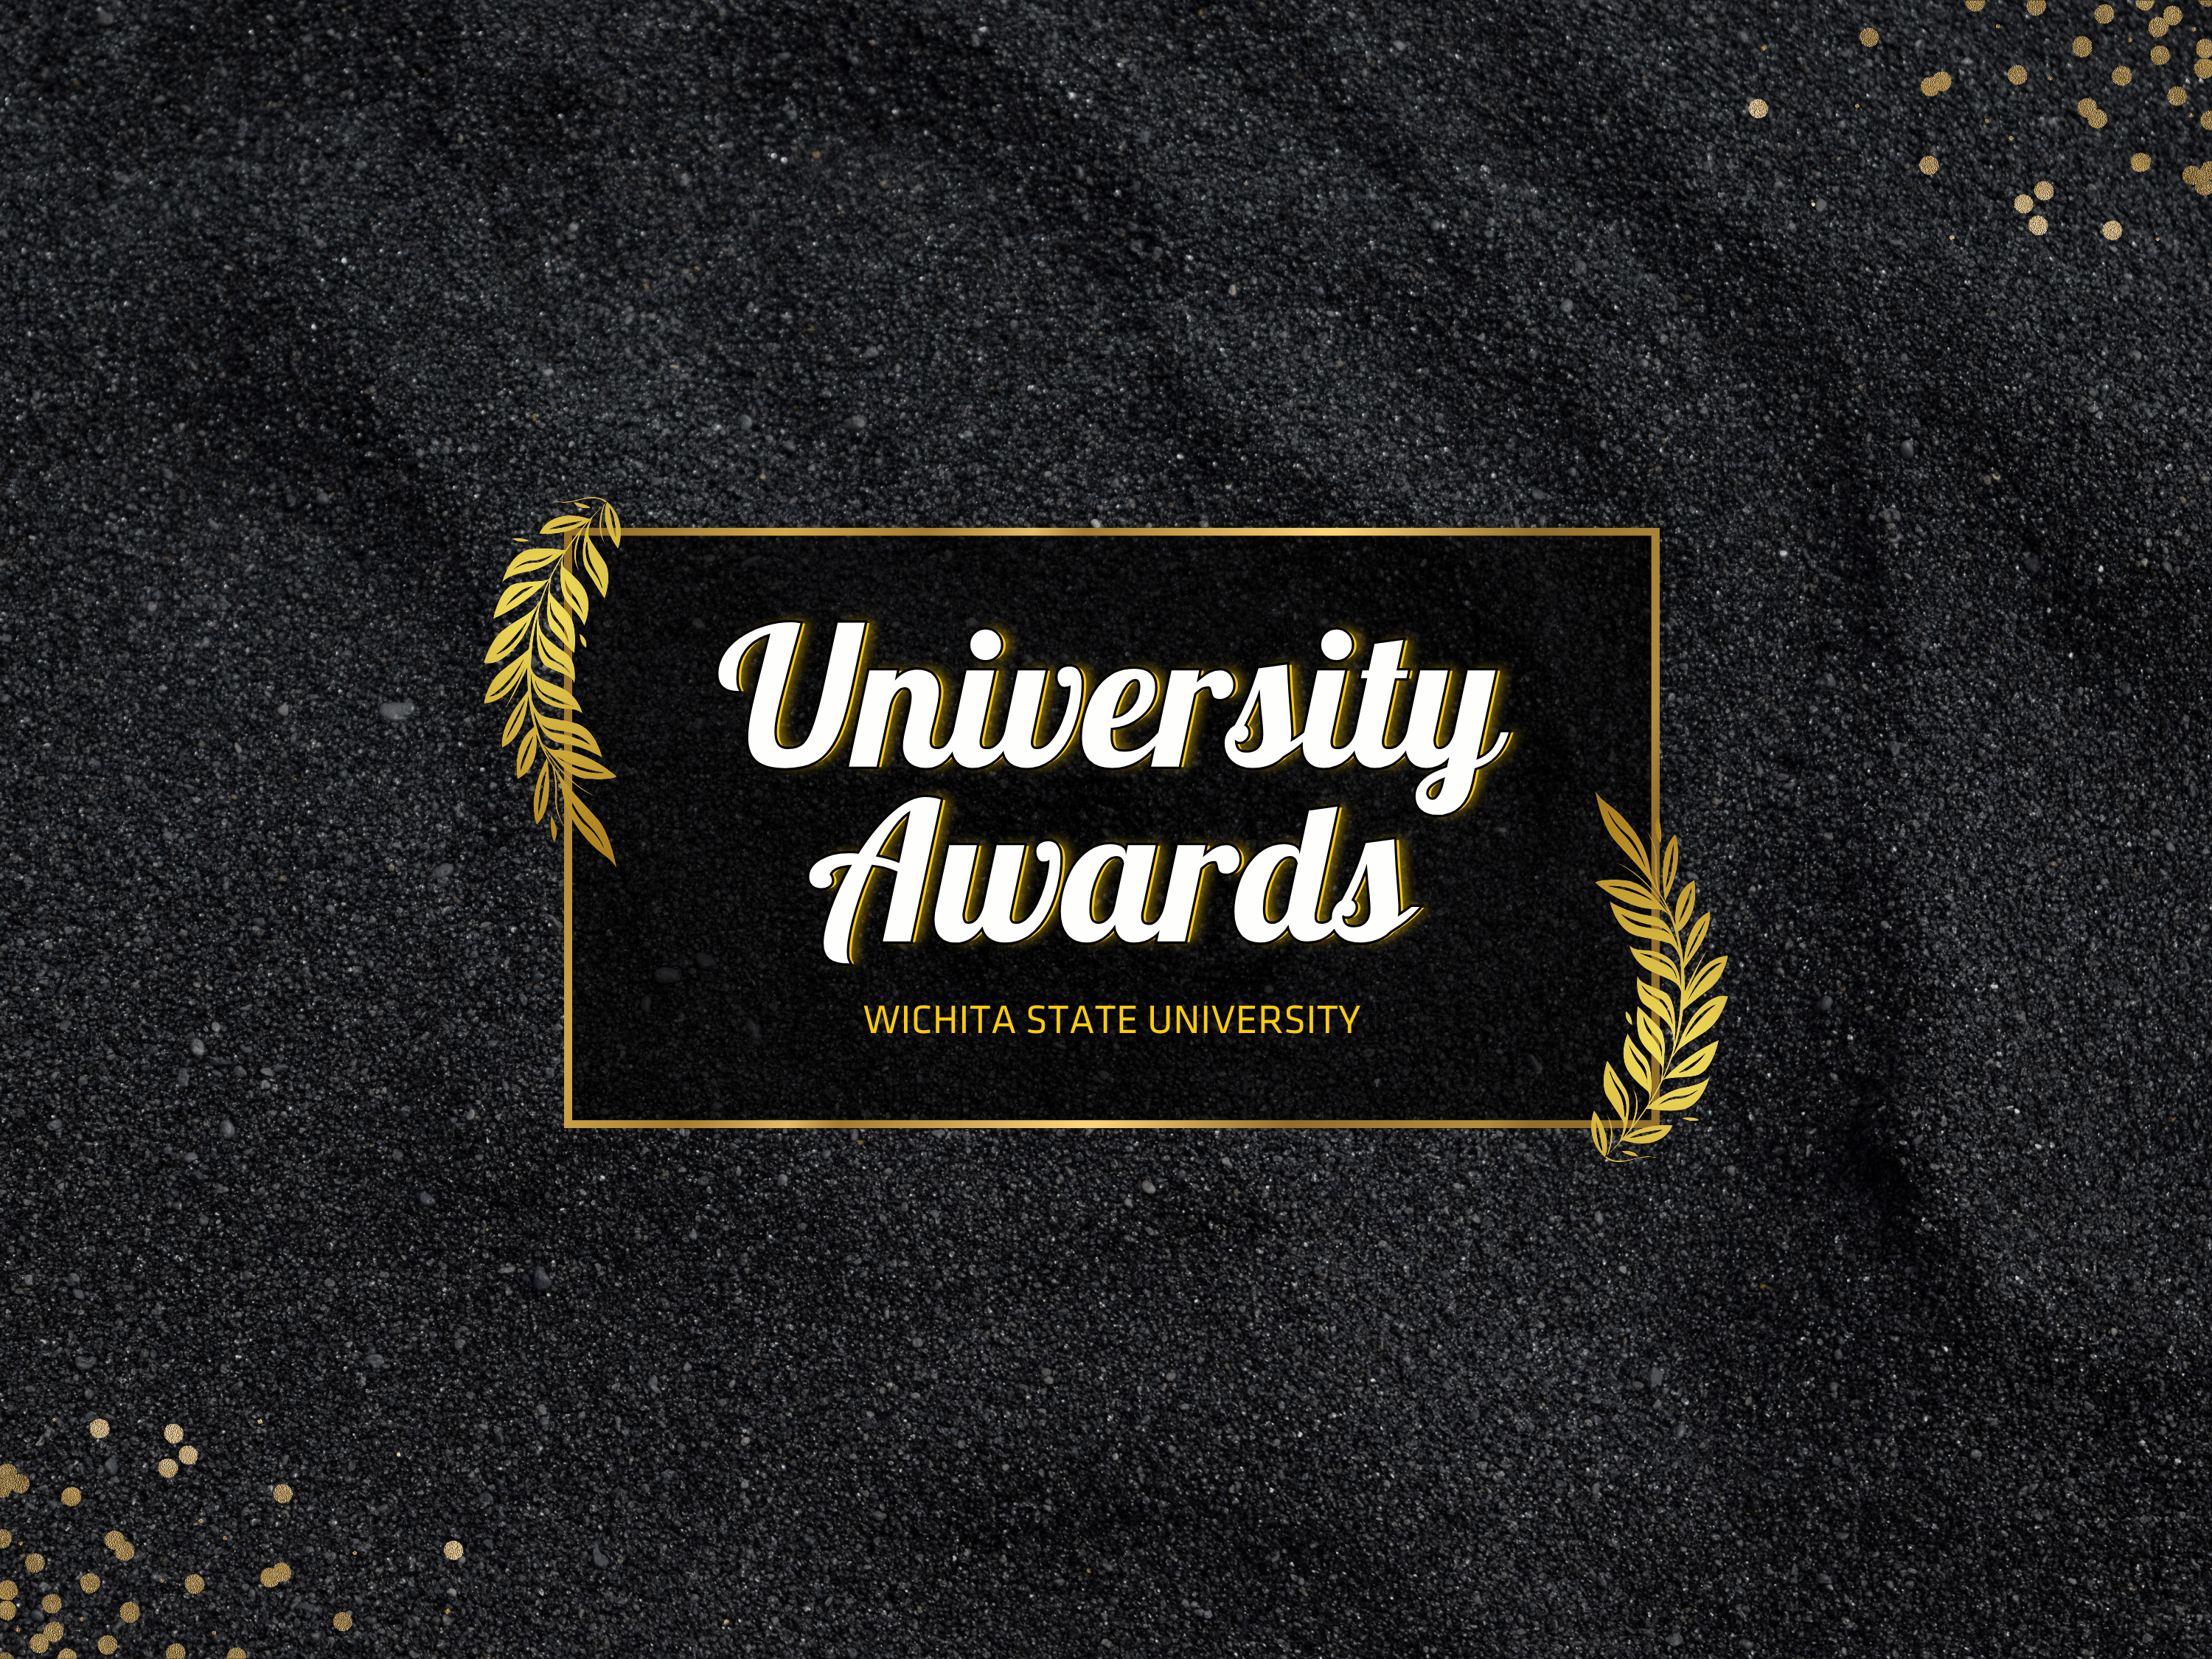 University Awards written in script white font on a black and gold background.